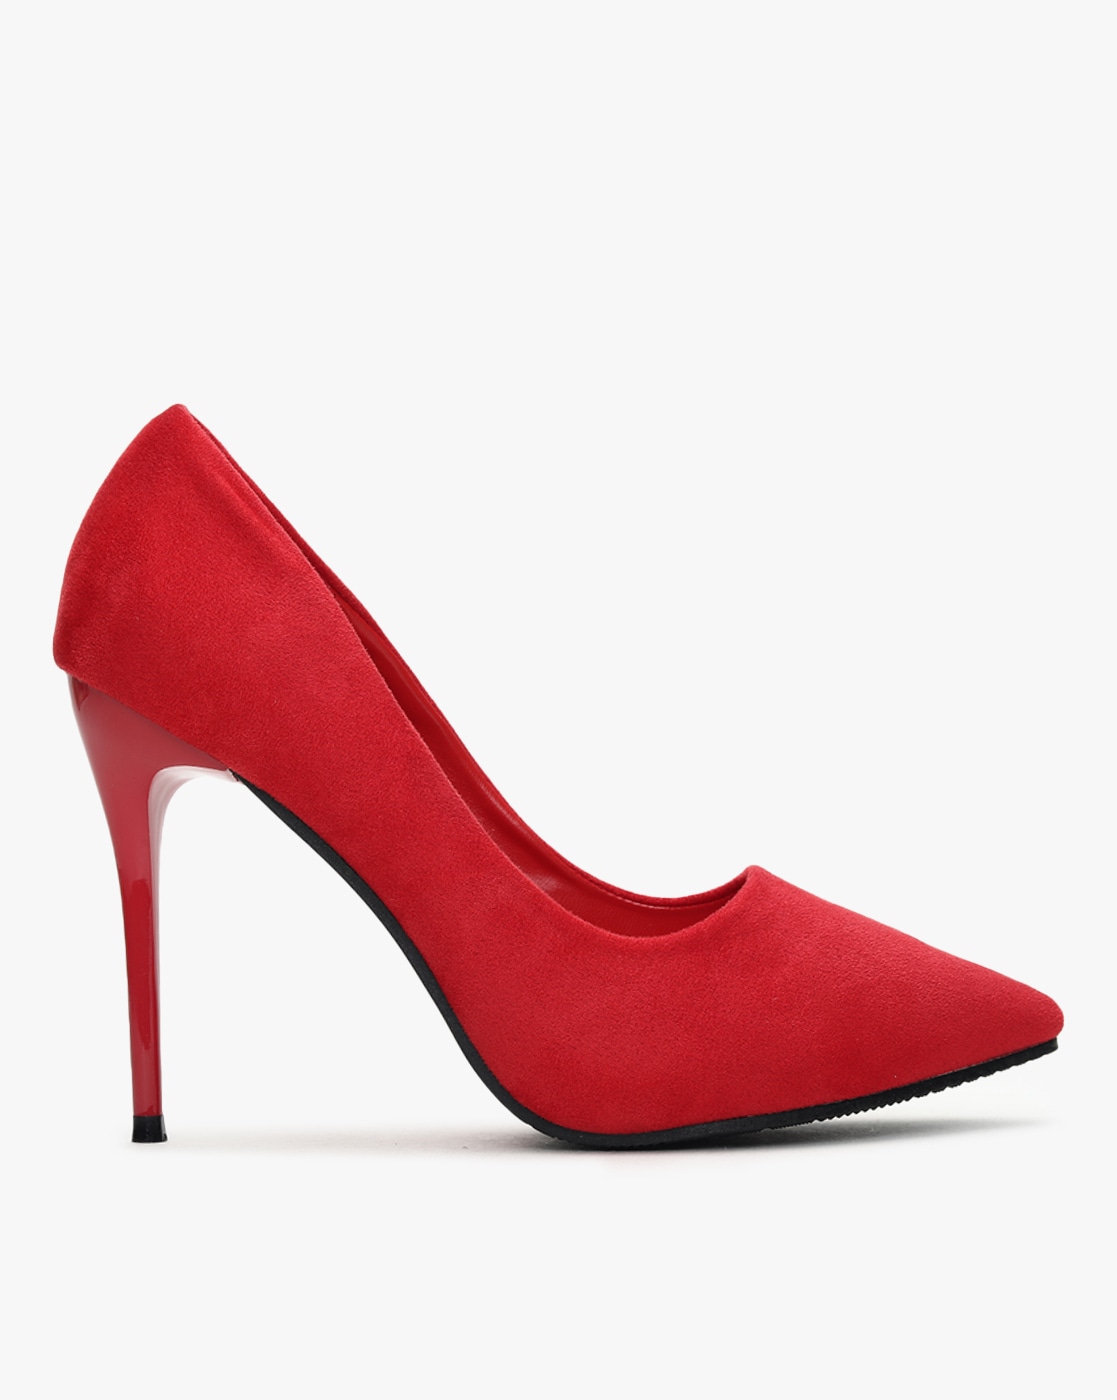 Red Heels | Buy Womens Red High Heels Online Australia - THE ICONIC